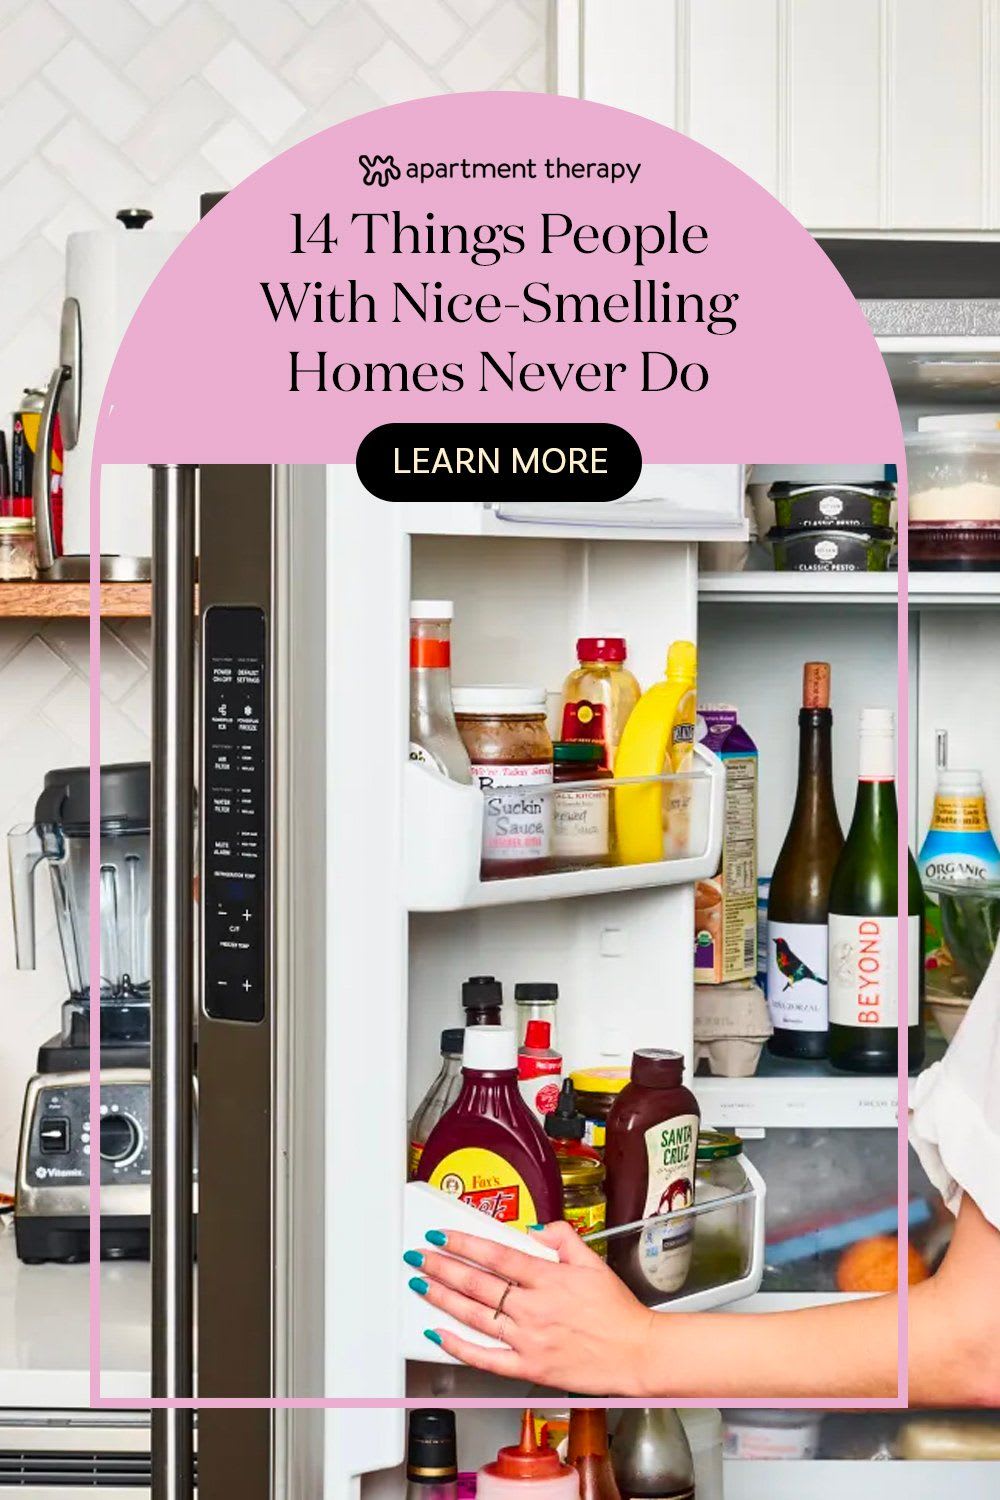 14 Things People With Nice-Smelling Homes Never Do